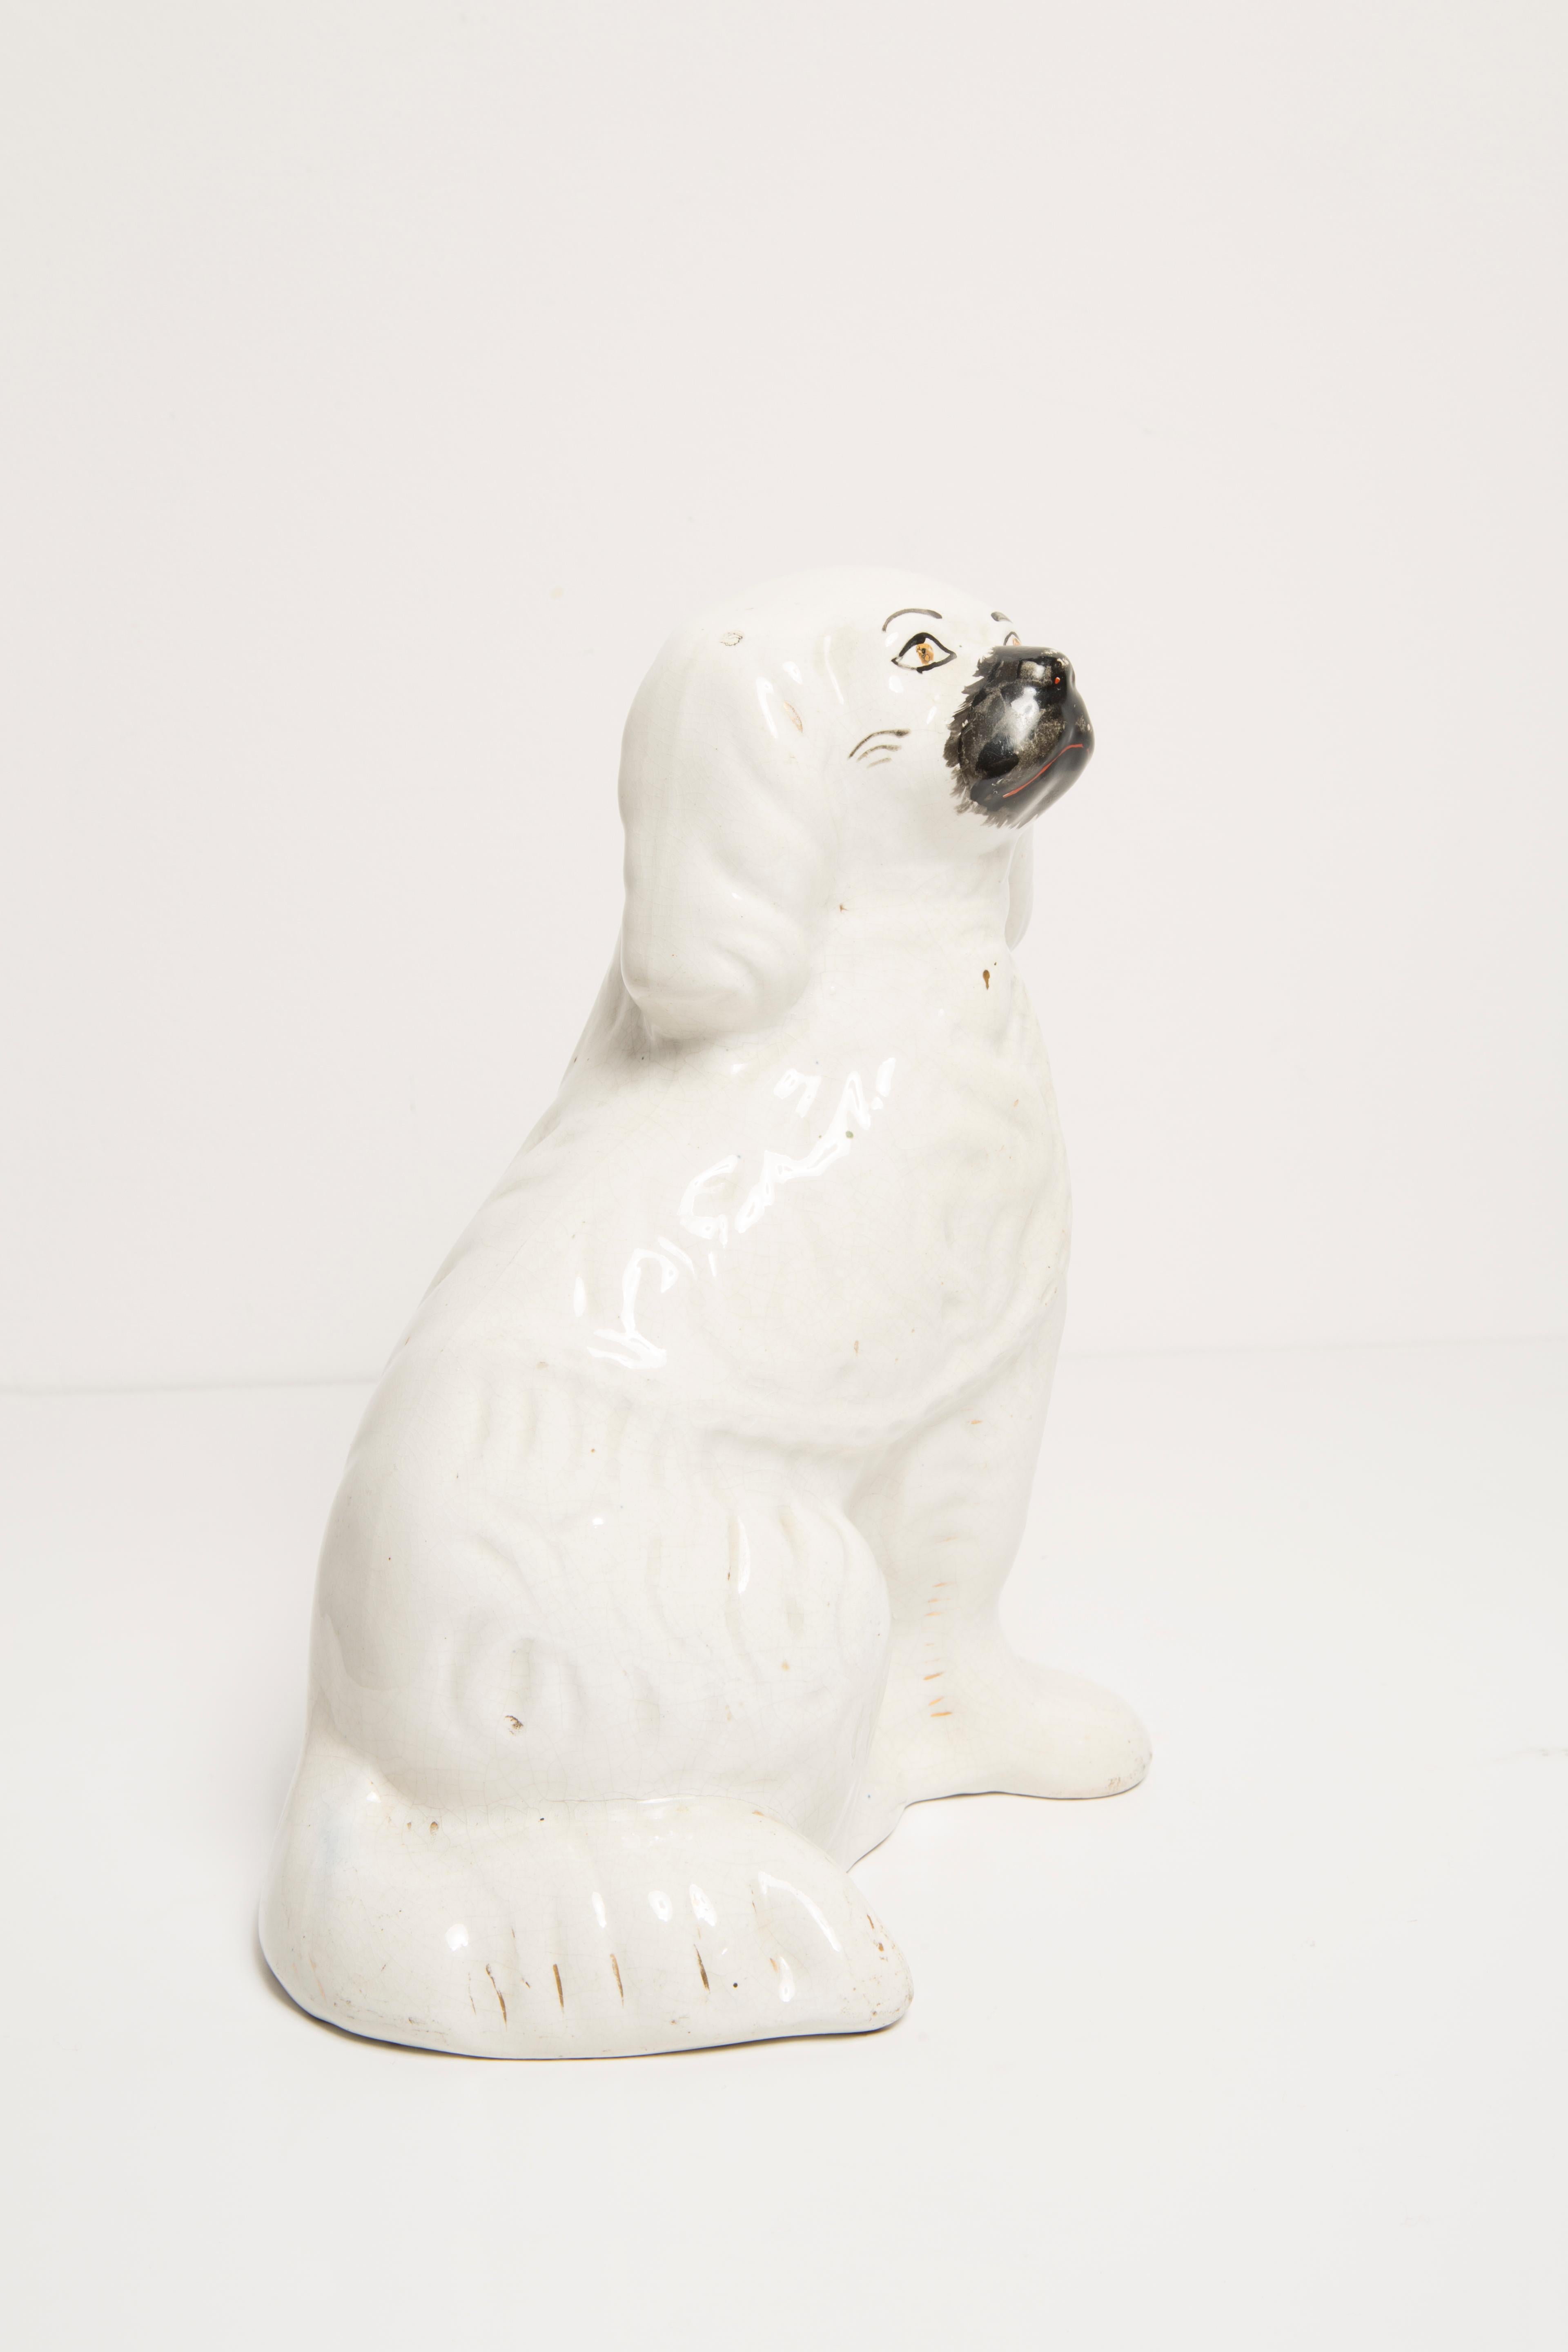 Mid Century White Spaniel Dog Sculpture Staffordshire England, 1960s For Sale 2